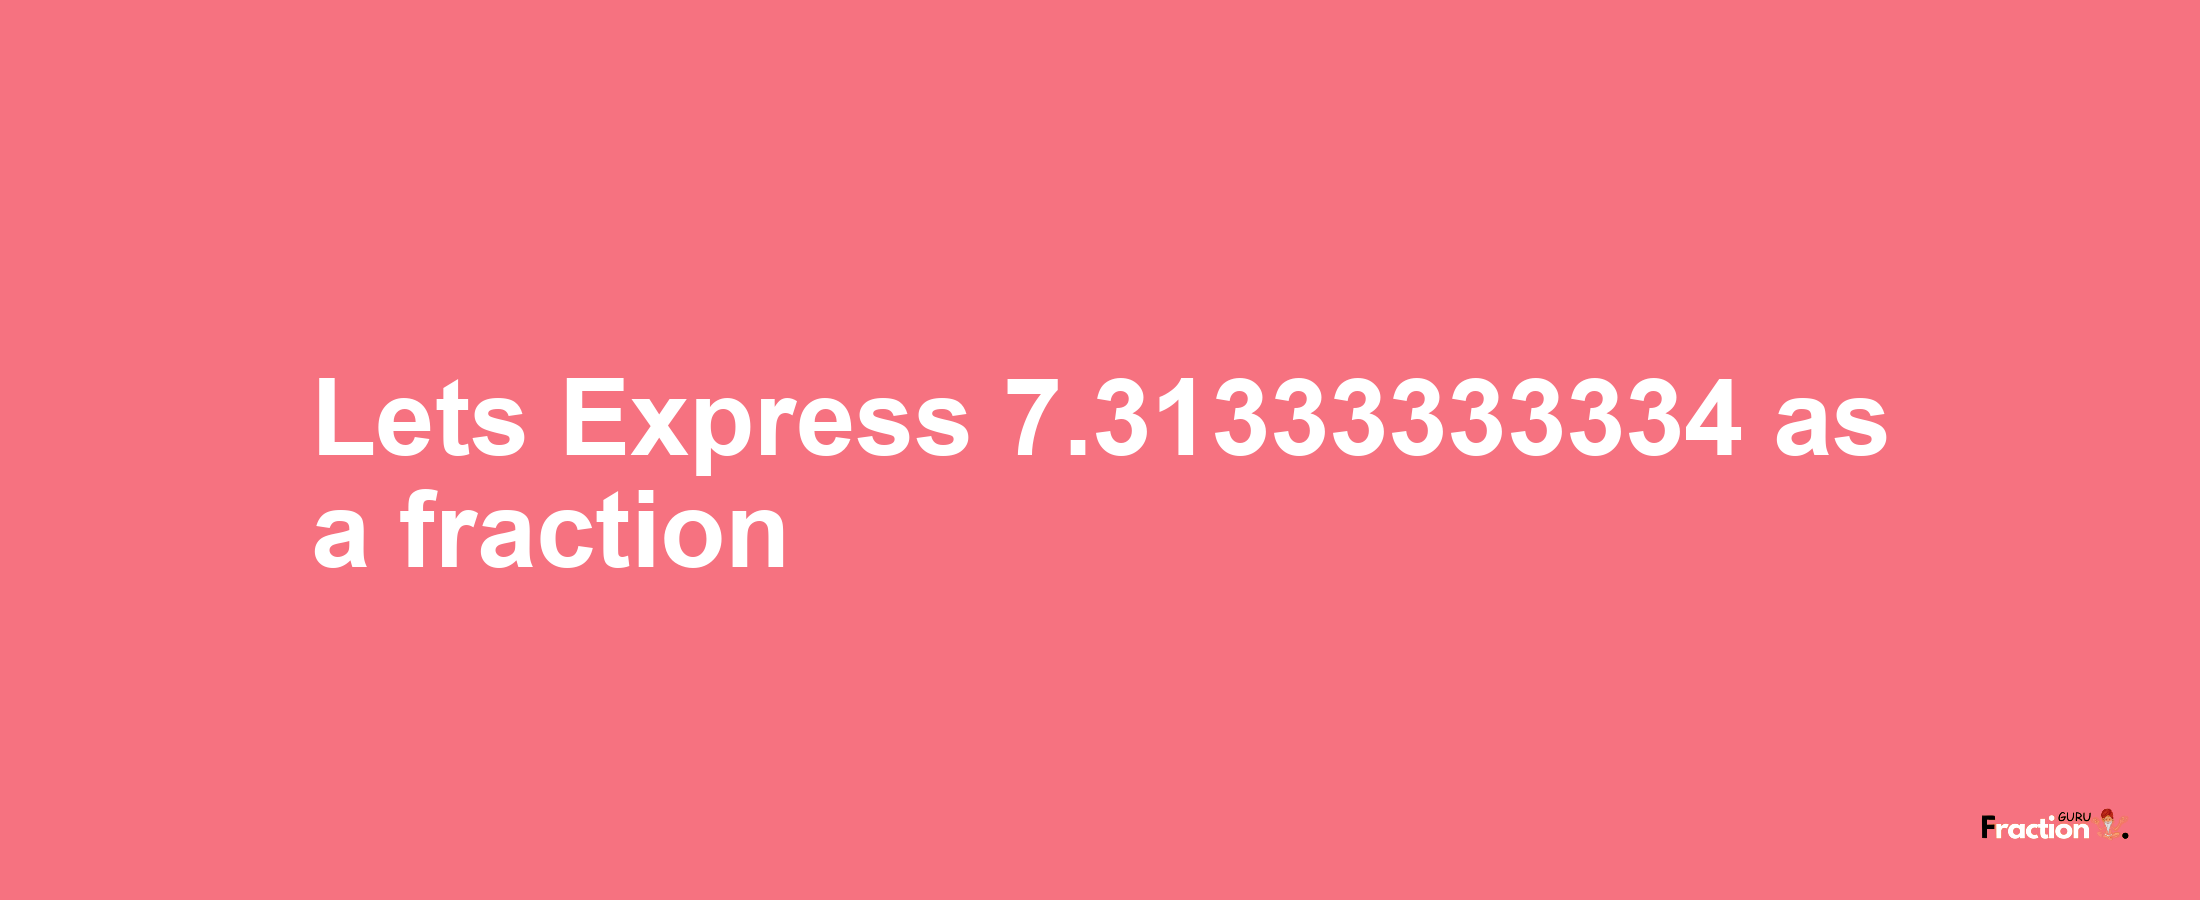 Lets Express 7.31333333334 as afraction